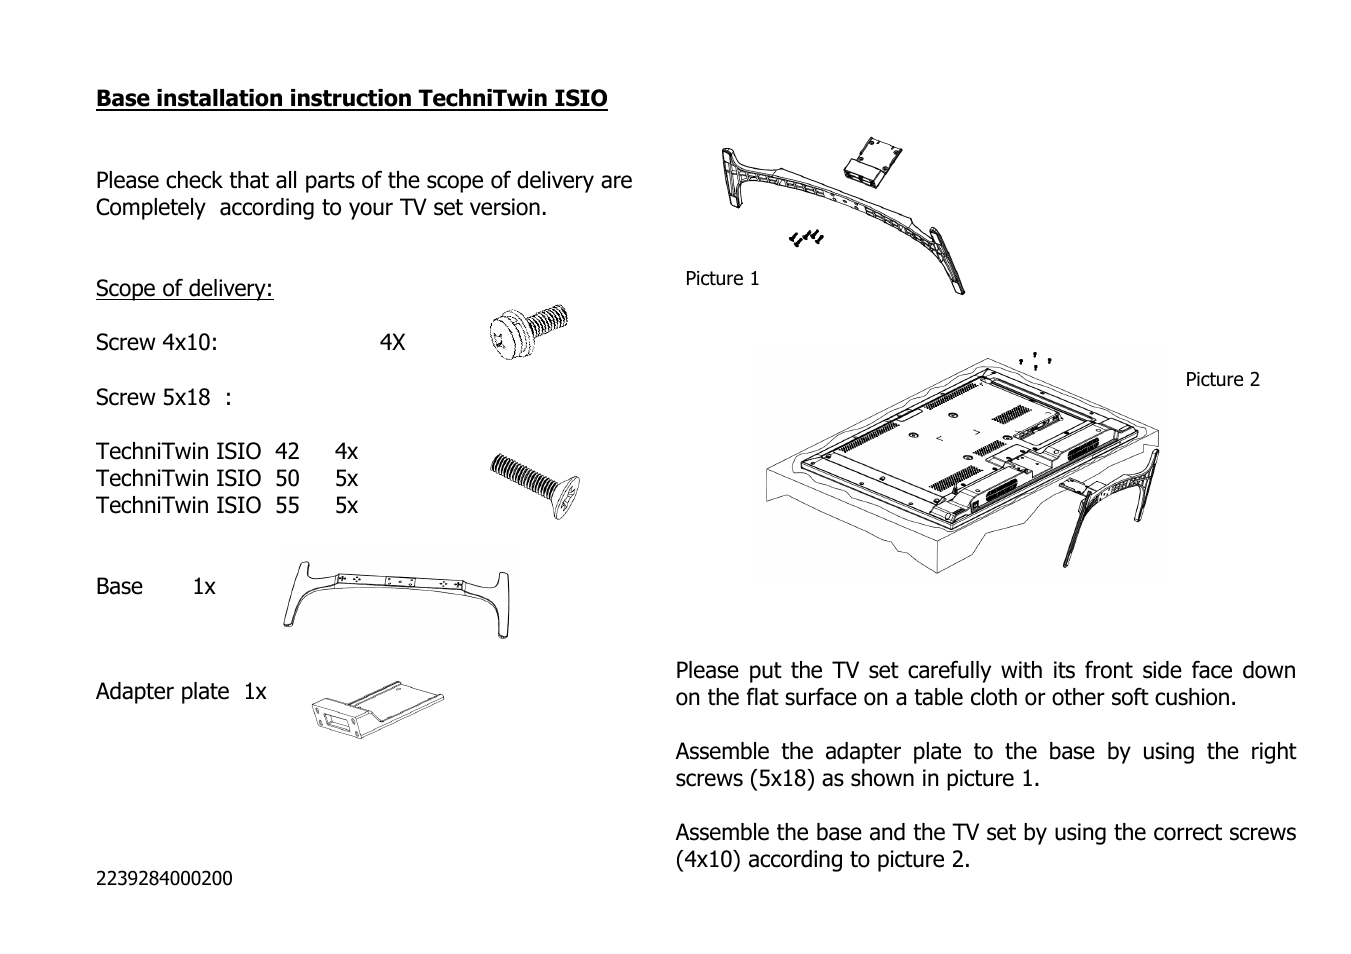 TechniTwin ISIO 55 Mounting instruction